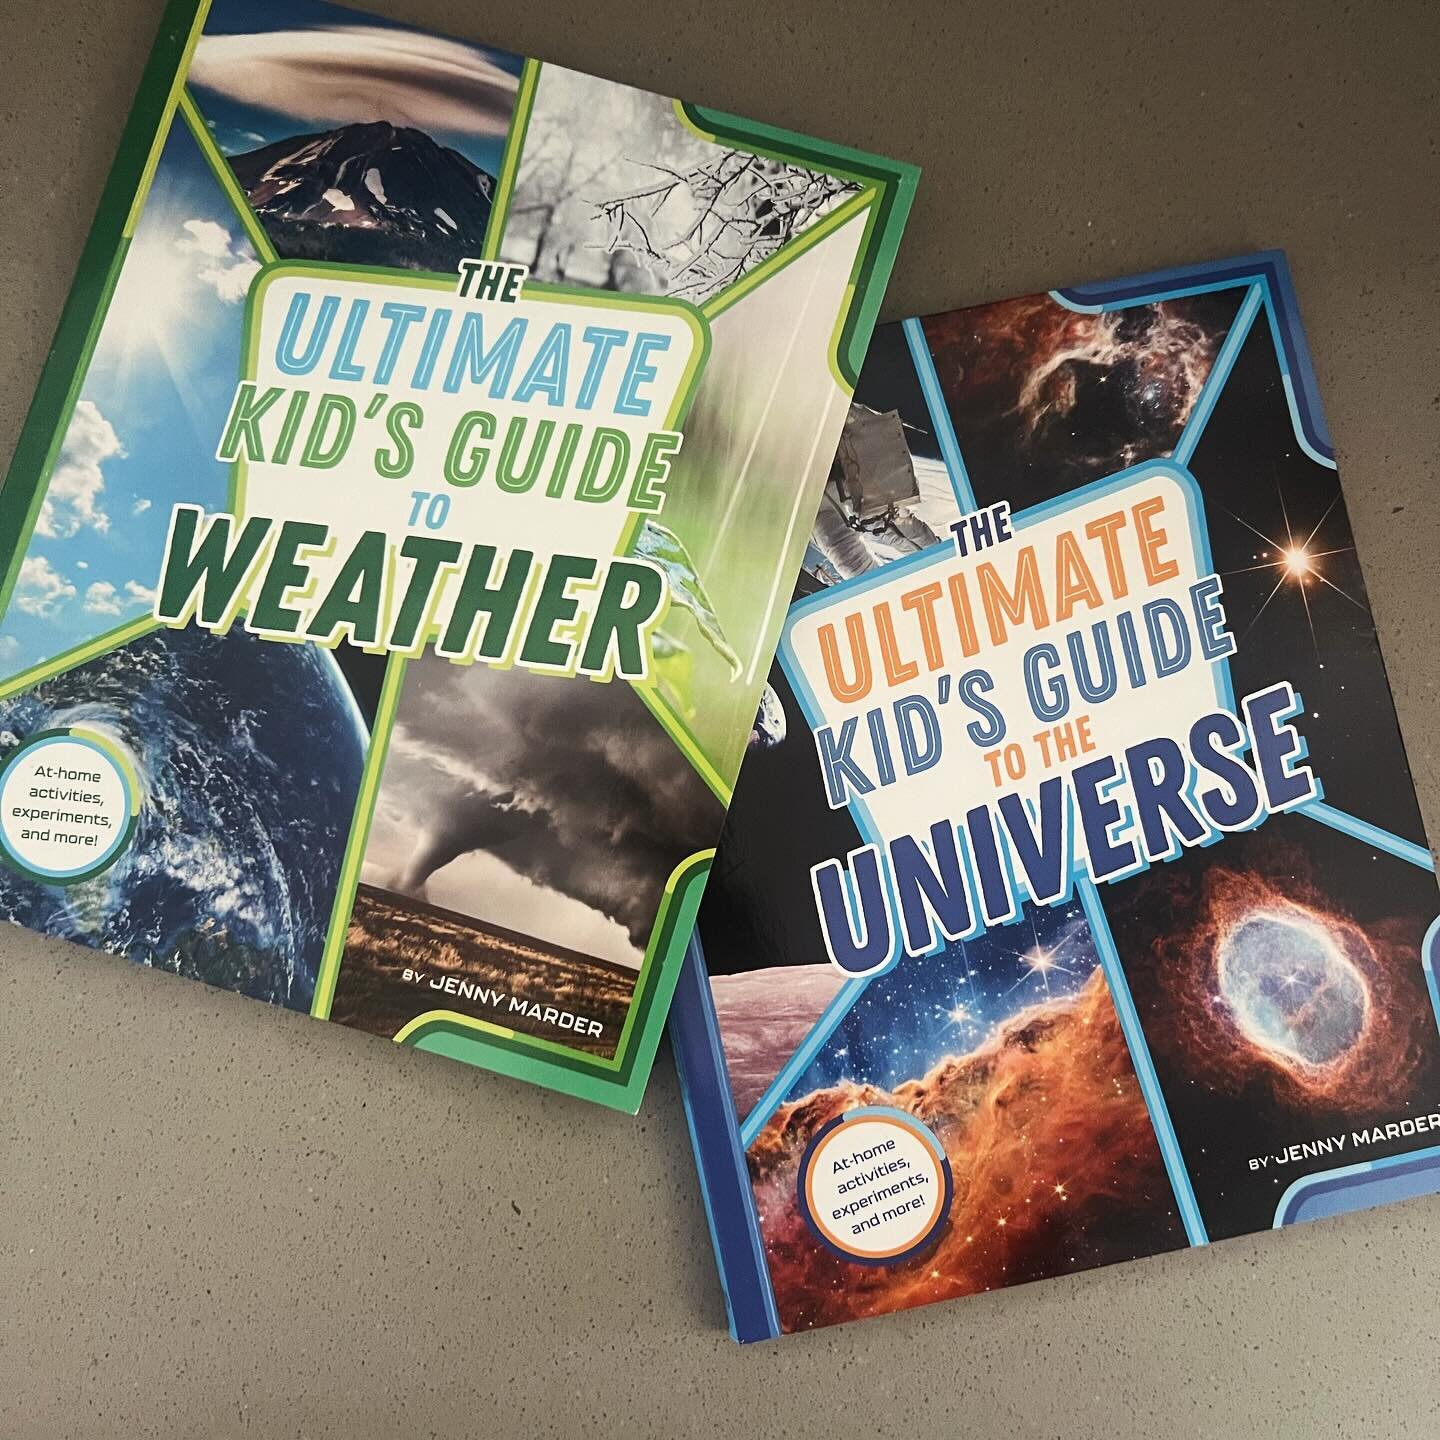 I finally understand the weather! Seriously. These books are for kids AND 50-year-olds who had really shitty science teachers in high school. Couldn&rsquo;t recommend more highly.

(Also, I&rsquo;ve had a lot of books inscribed for me over the years,